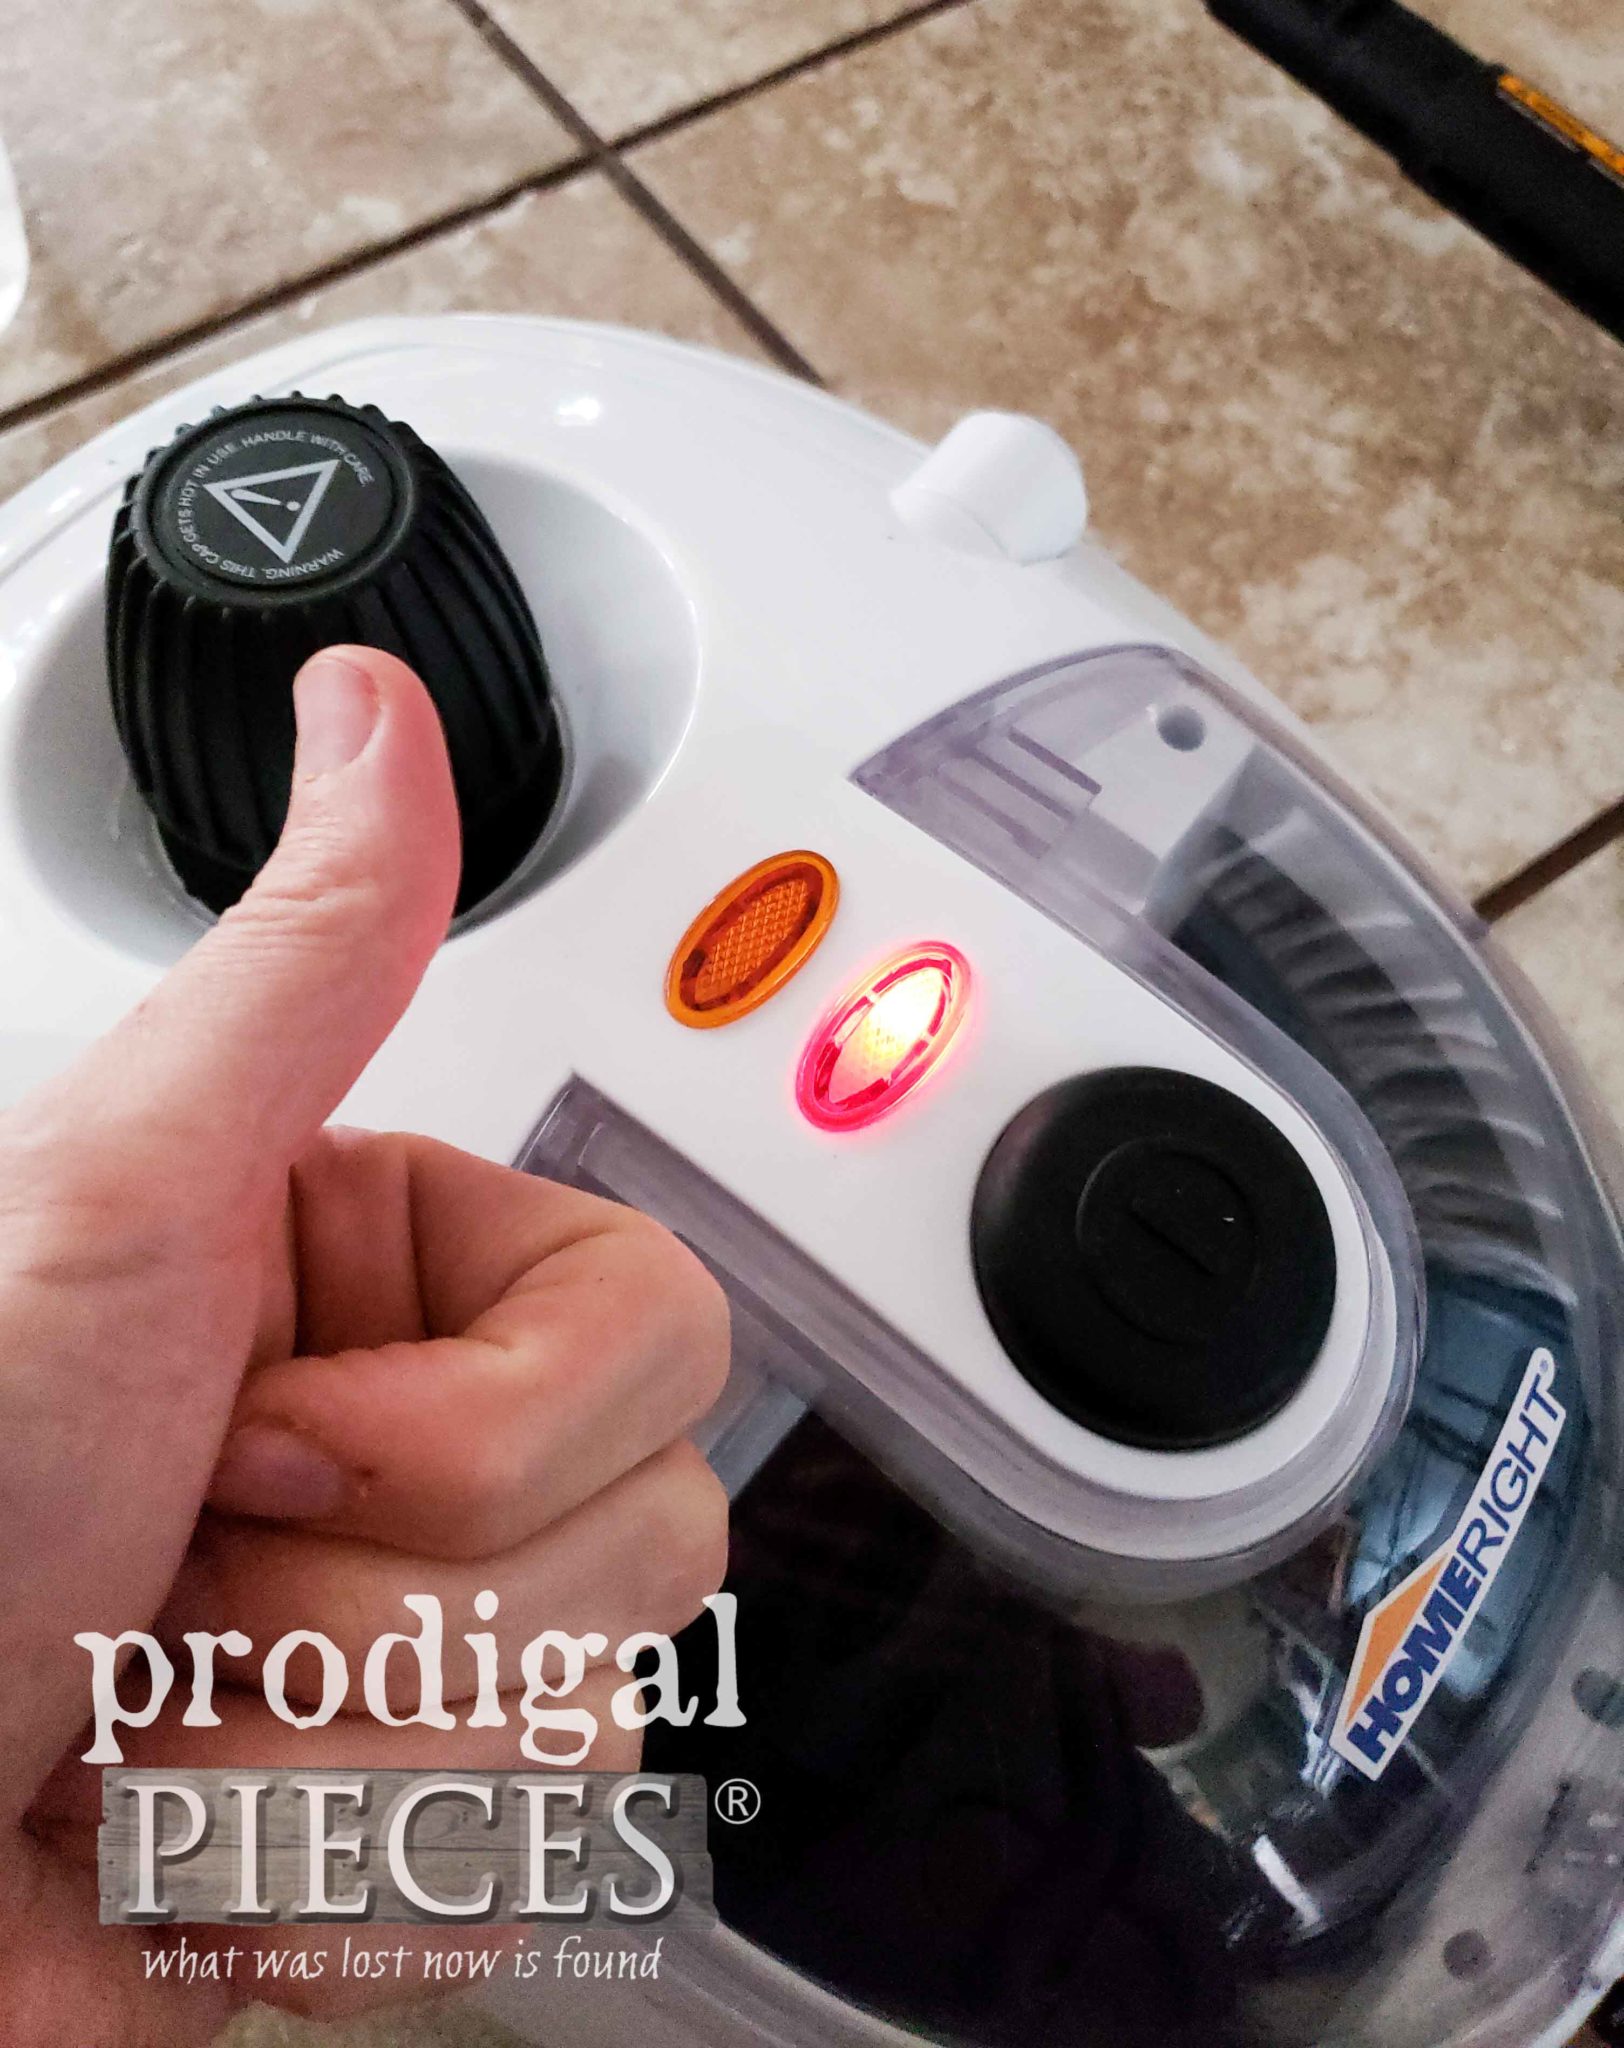 HomeRight SteamMachine Ready to Clean | prodigalpieces.com